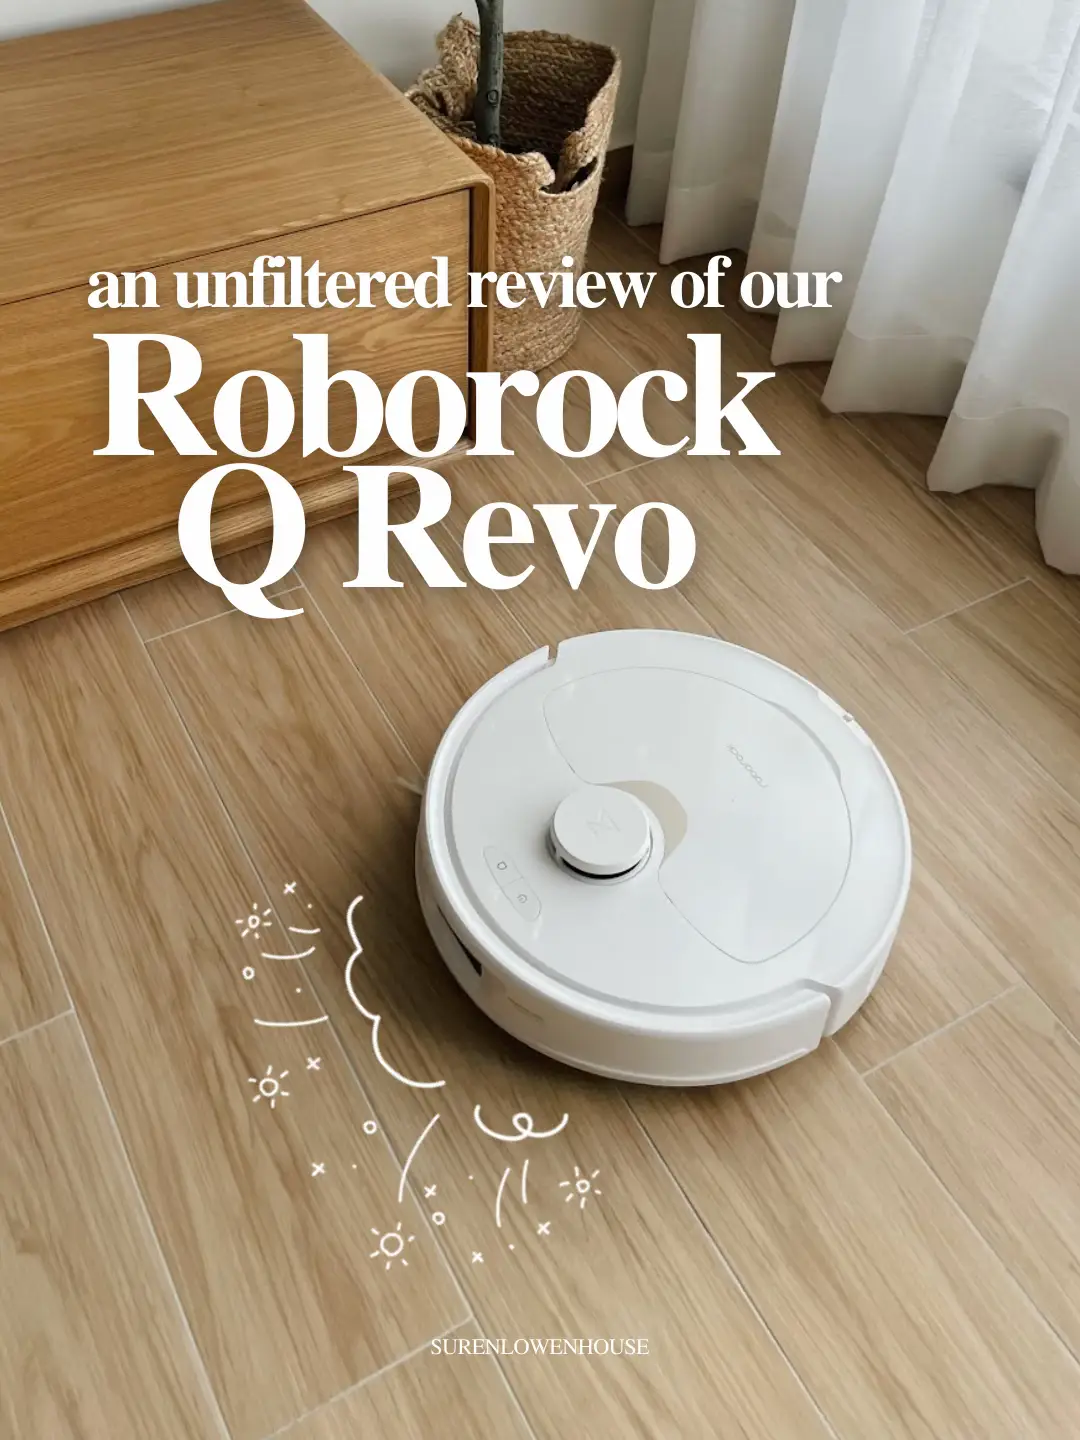 Introducing Roborock Q Revo: The Ultimate Smart Home Cleaning